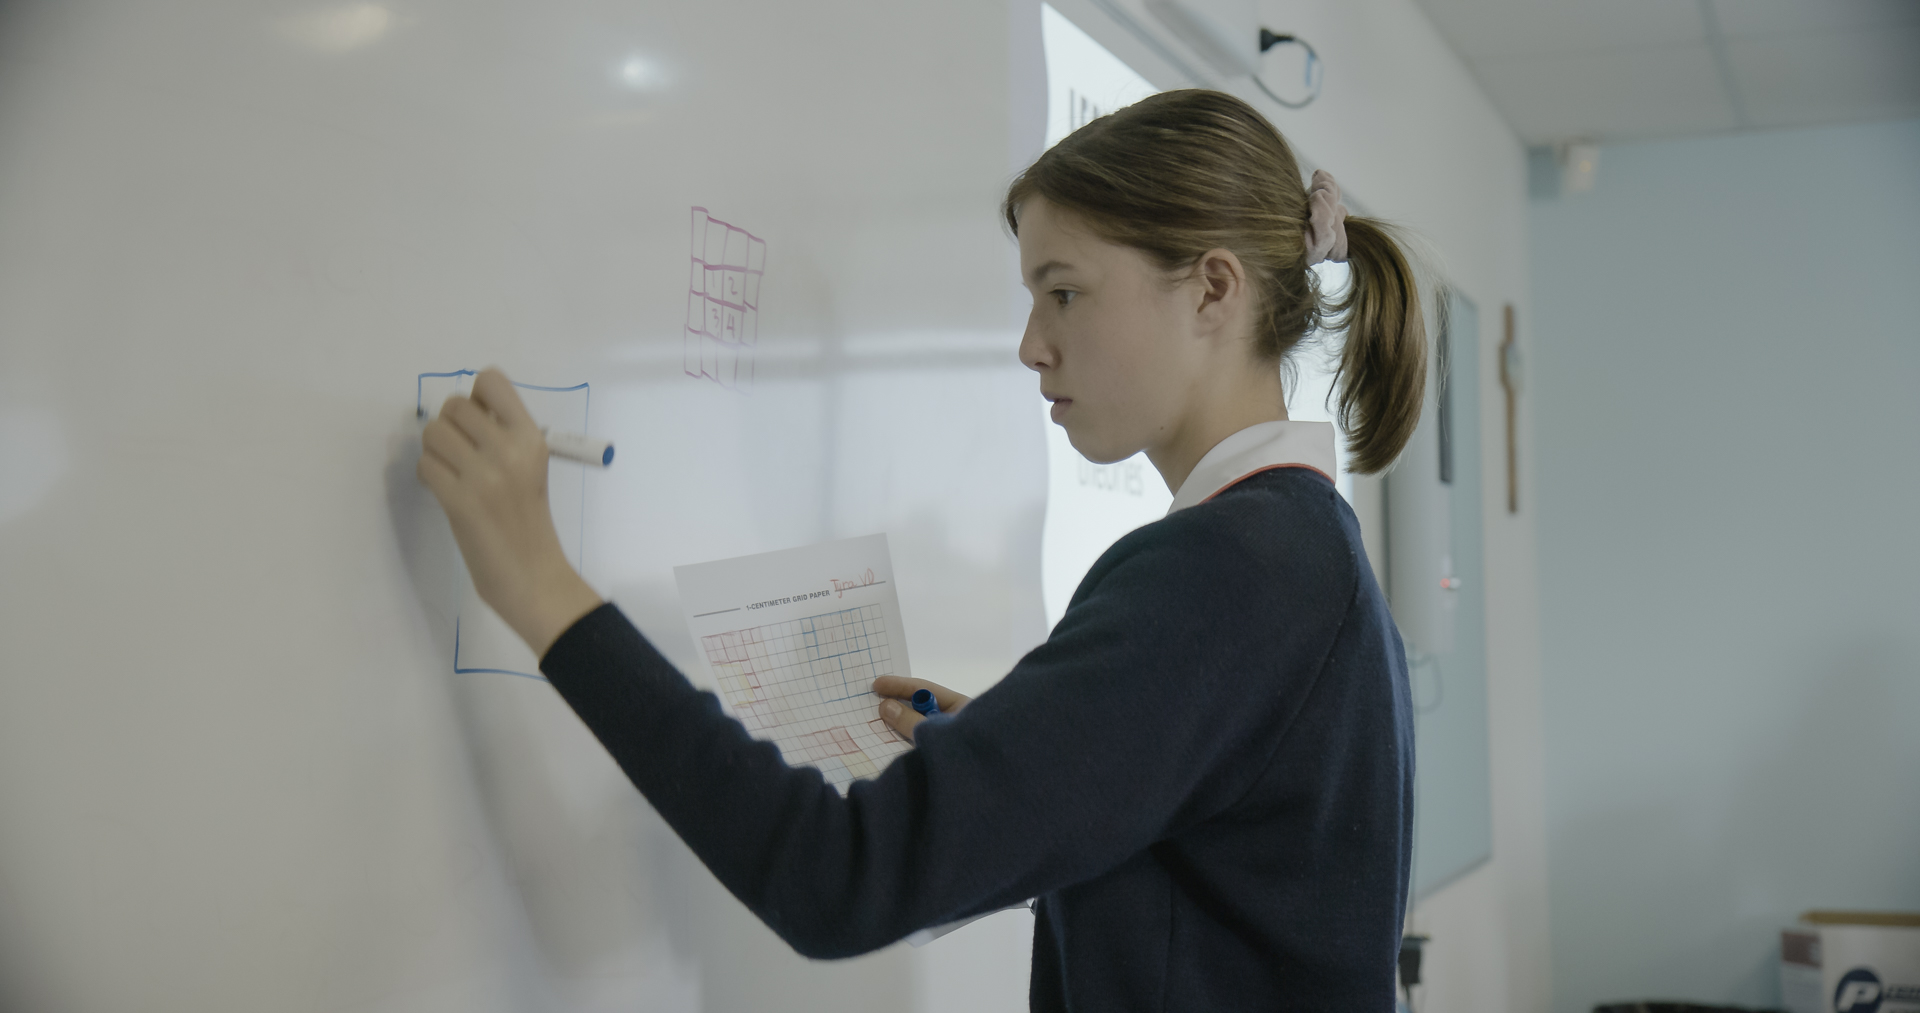 One girl draws a shape on the whiteboard, her face intense with focus. 